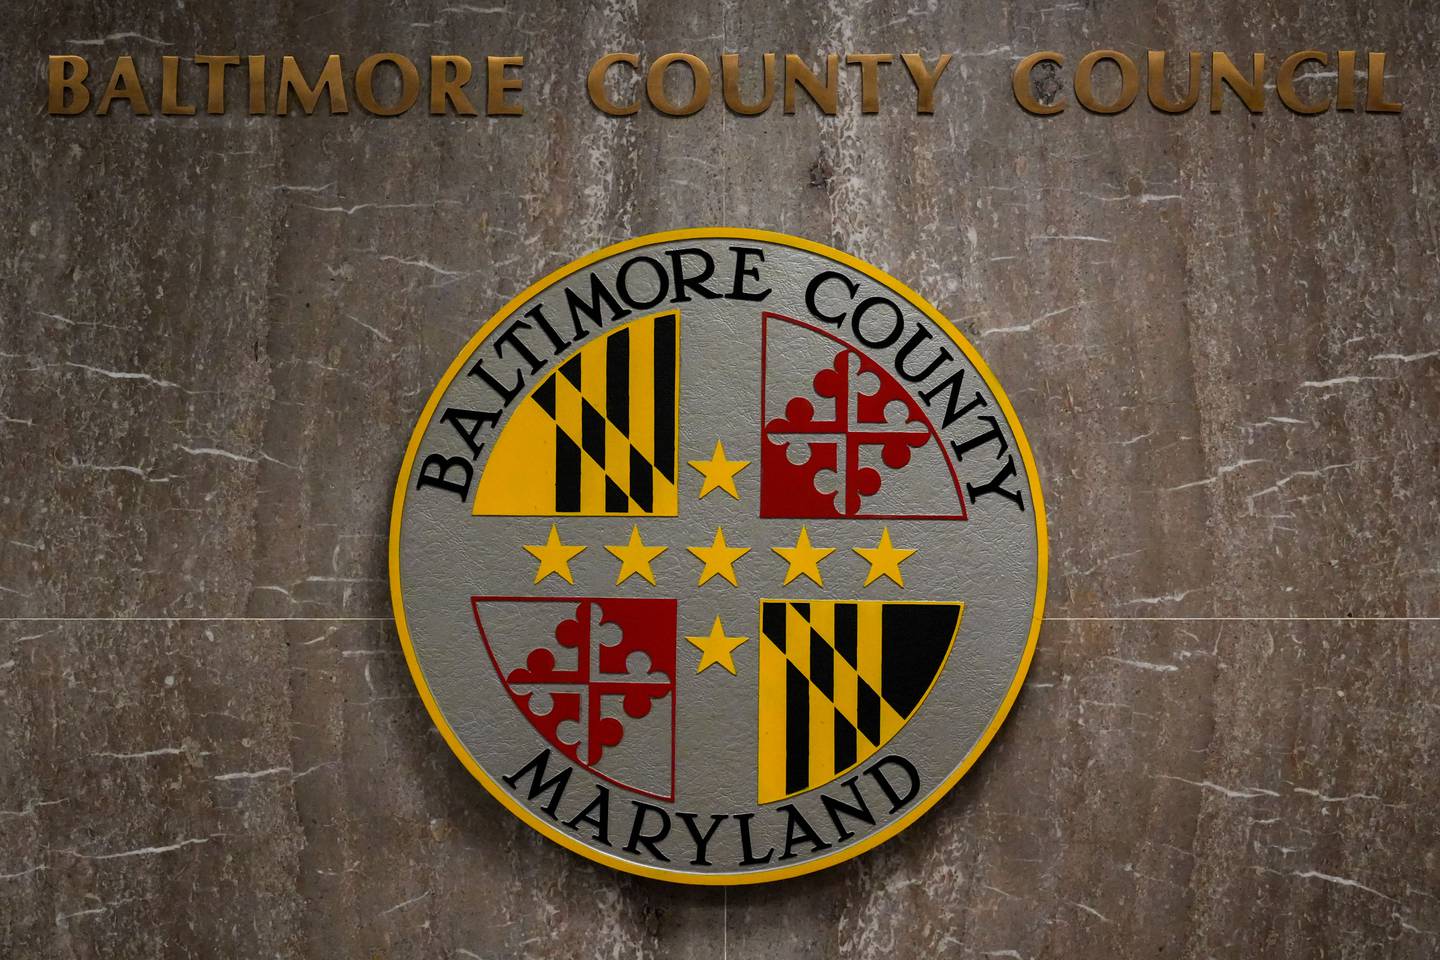 6/16/22—Signs reading “Baltimore County Maryland” and “Baltimore County Council” hang on the wall inside the historic Baltimore County Courthouse in Towson, the center of county government.